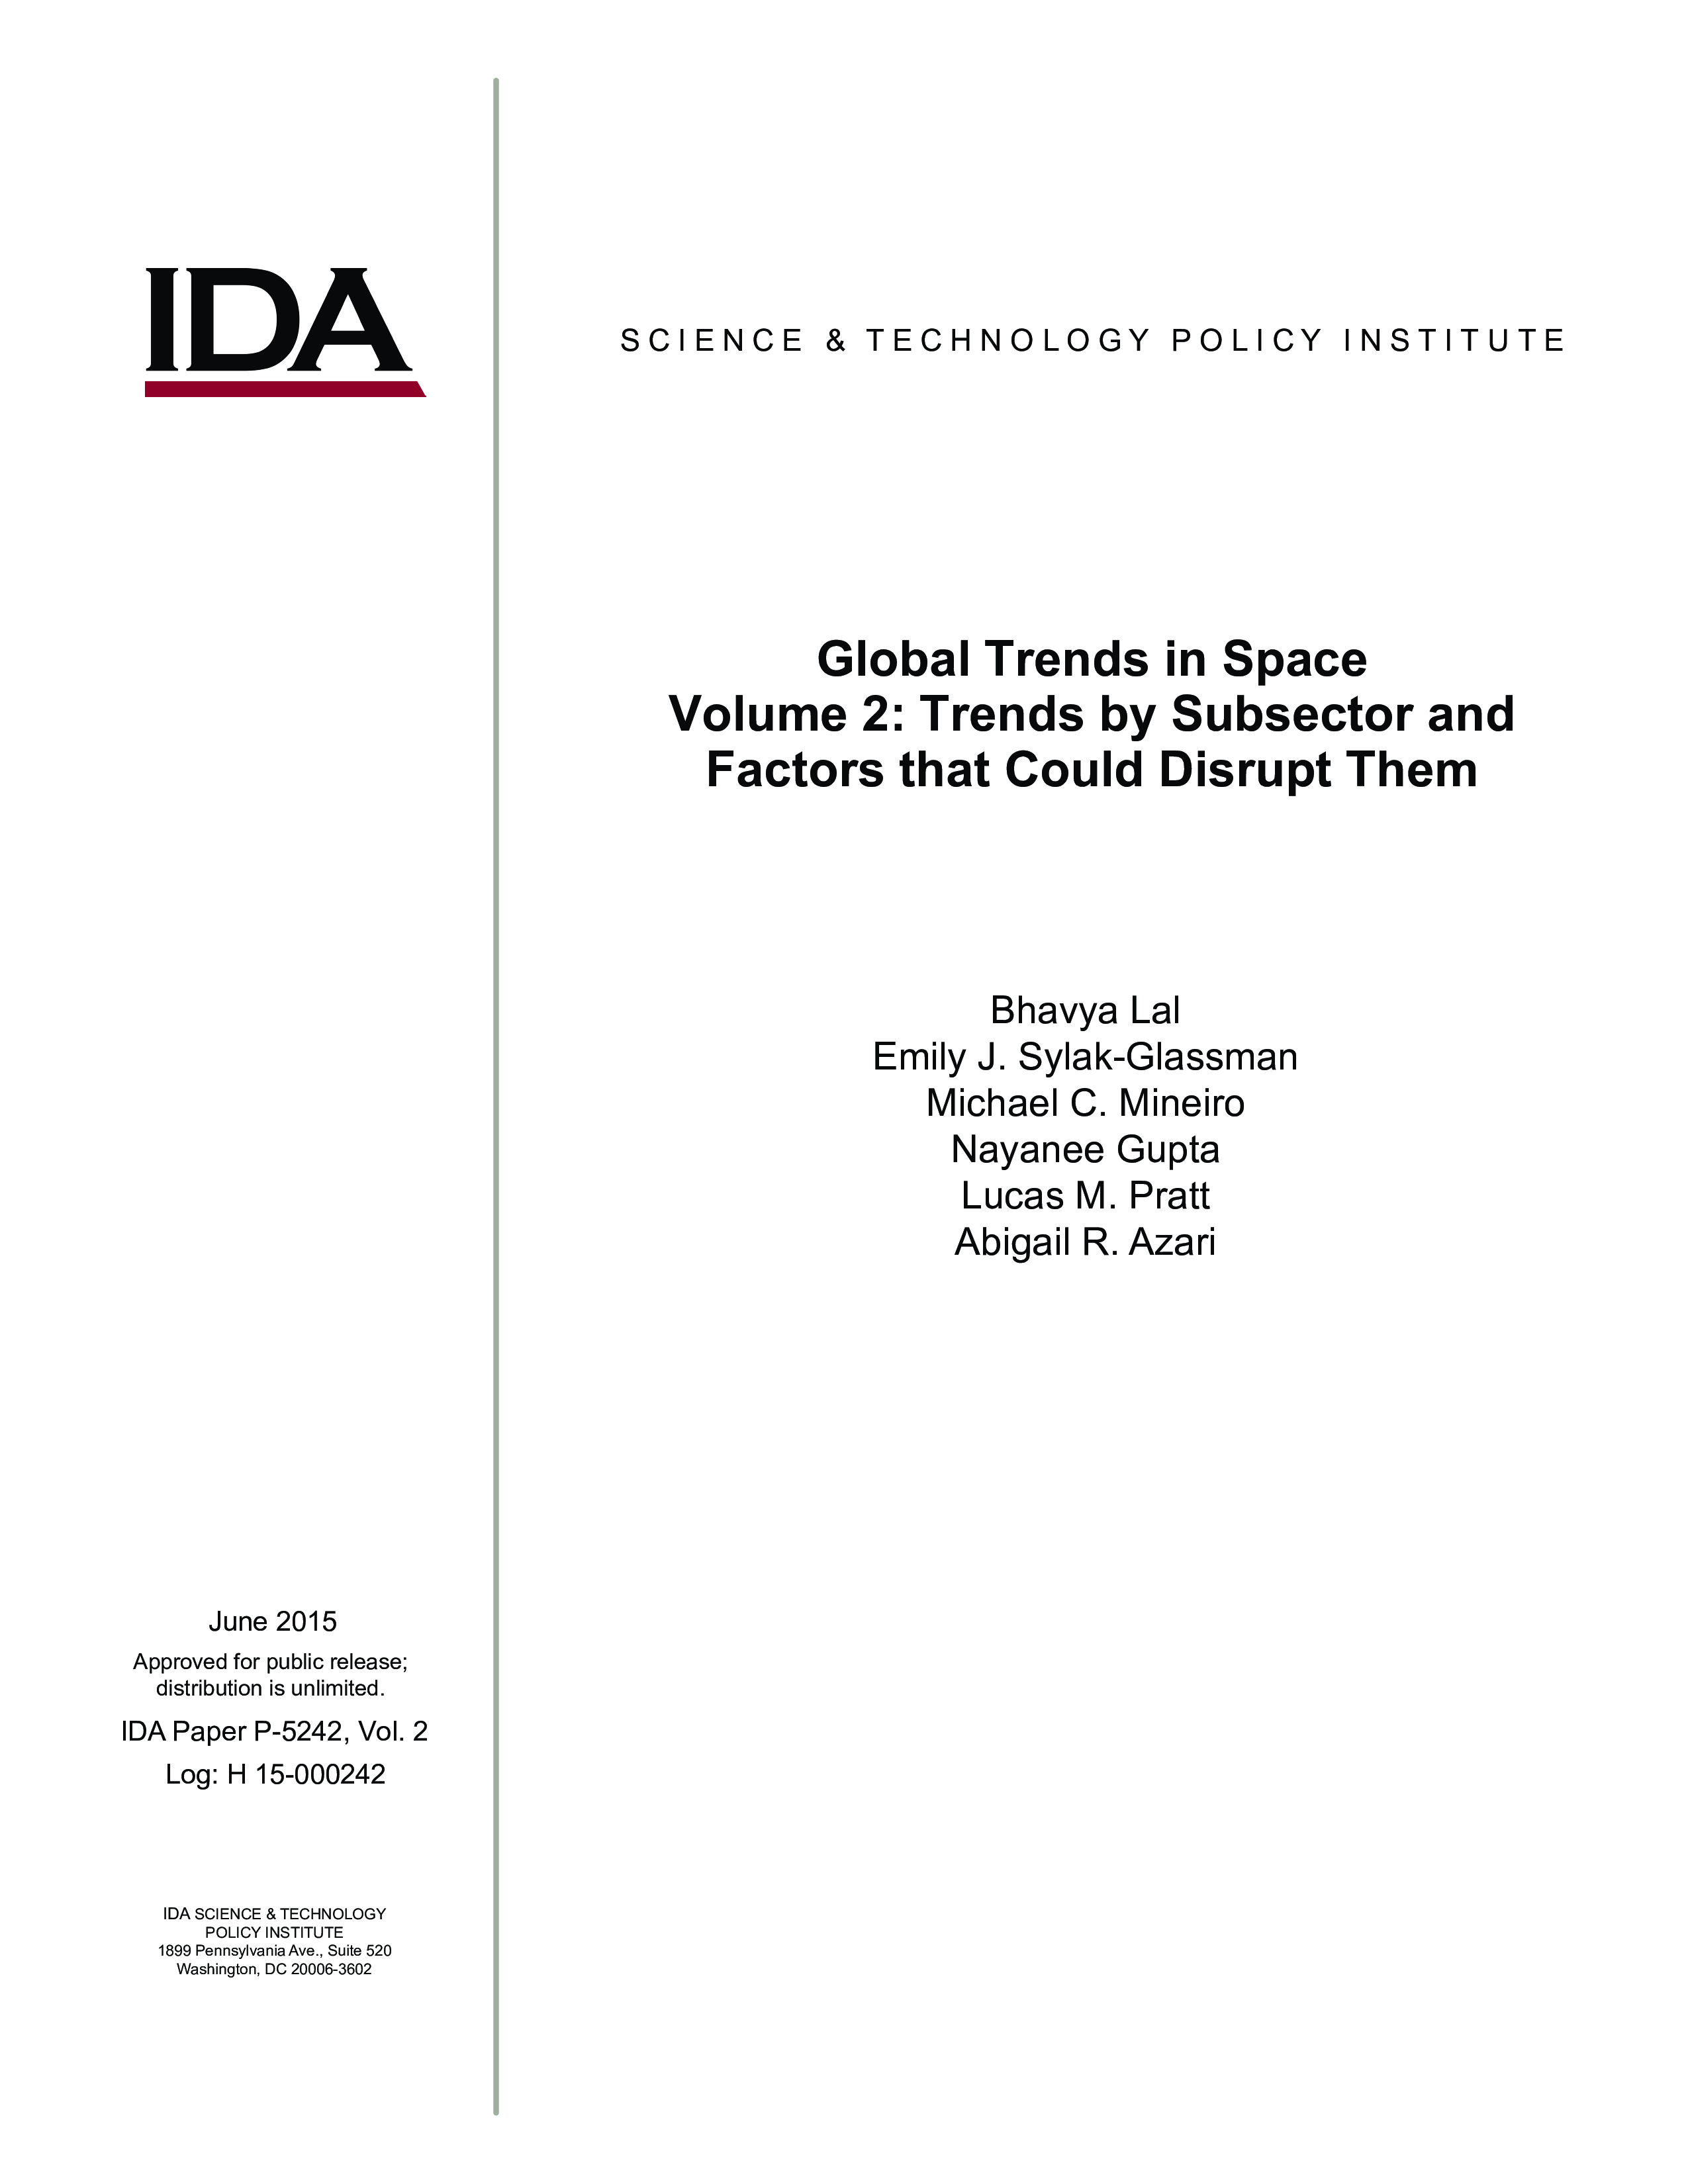 Global Trends in Space, Volume 2: Trends by Subsector and  Factors that Could Disrupt Them 